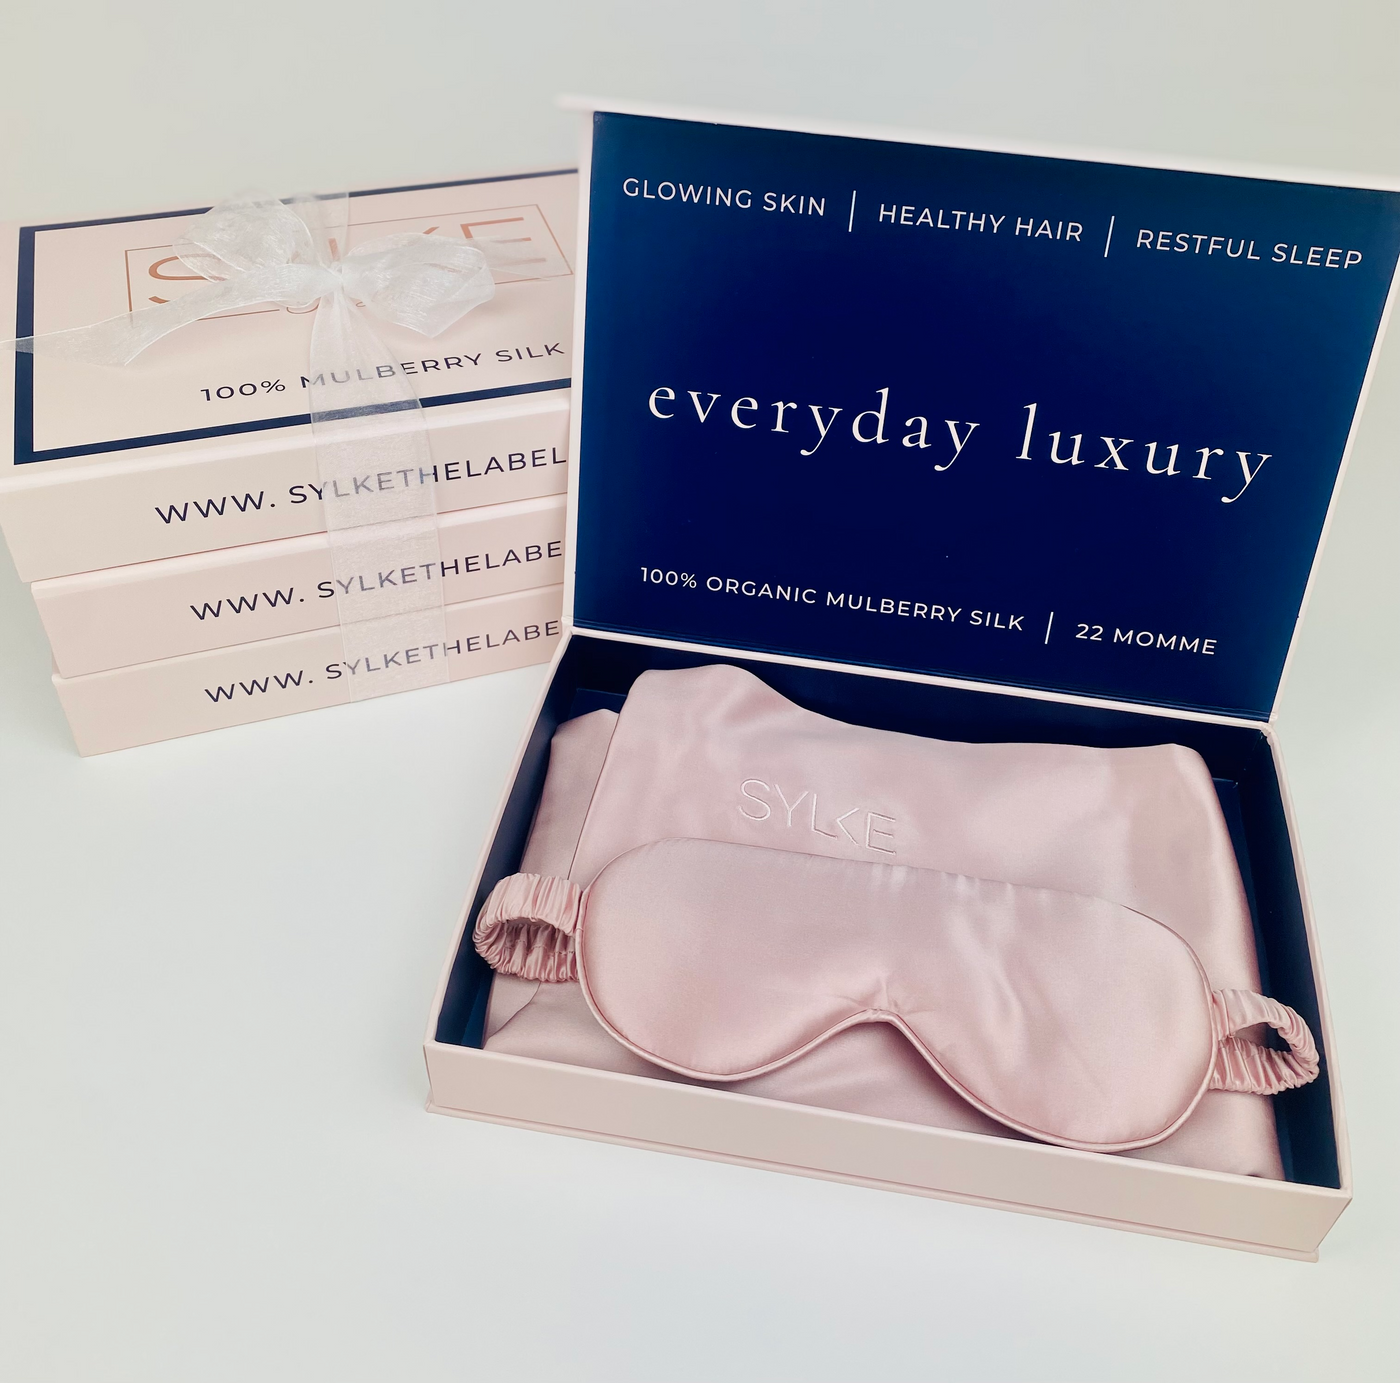 Mulberry silk pillow case cover and eye mask boxed set